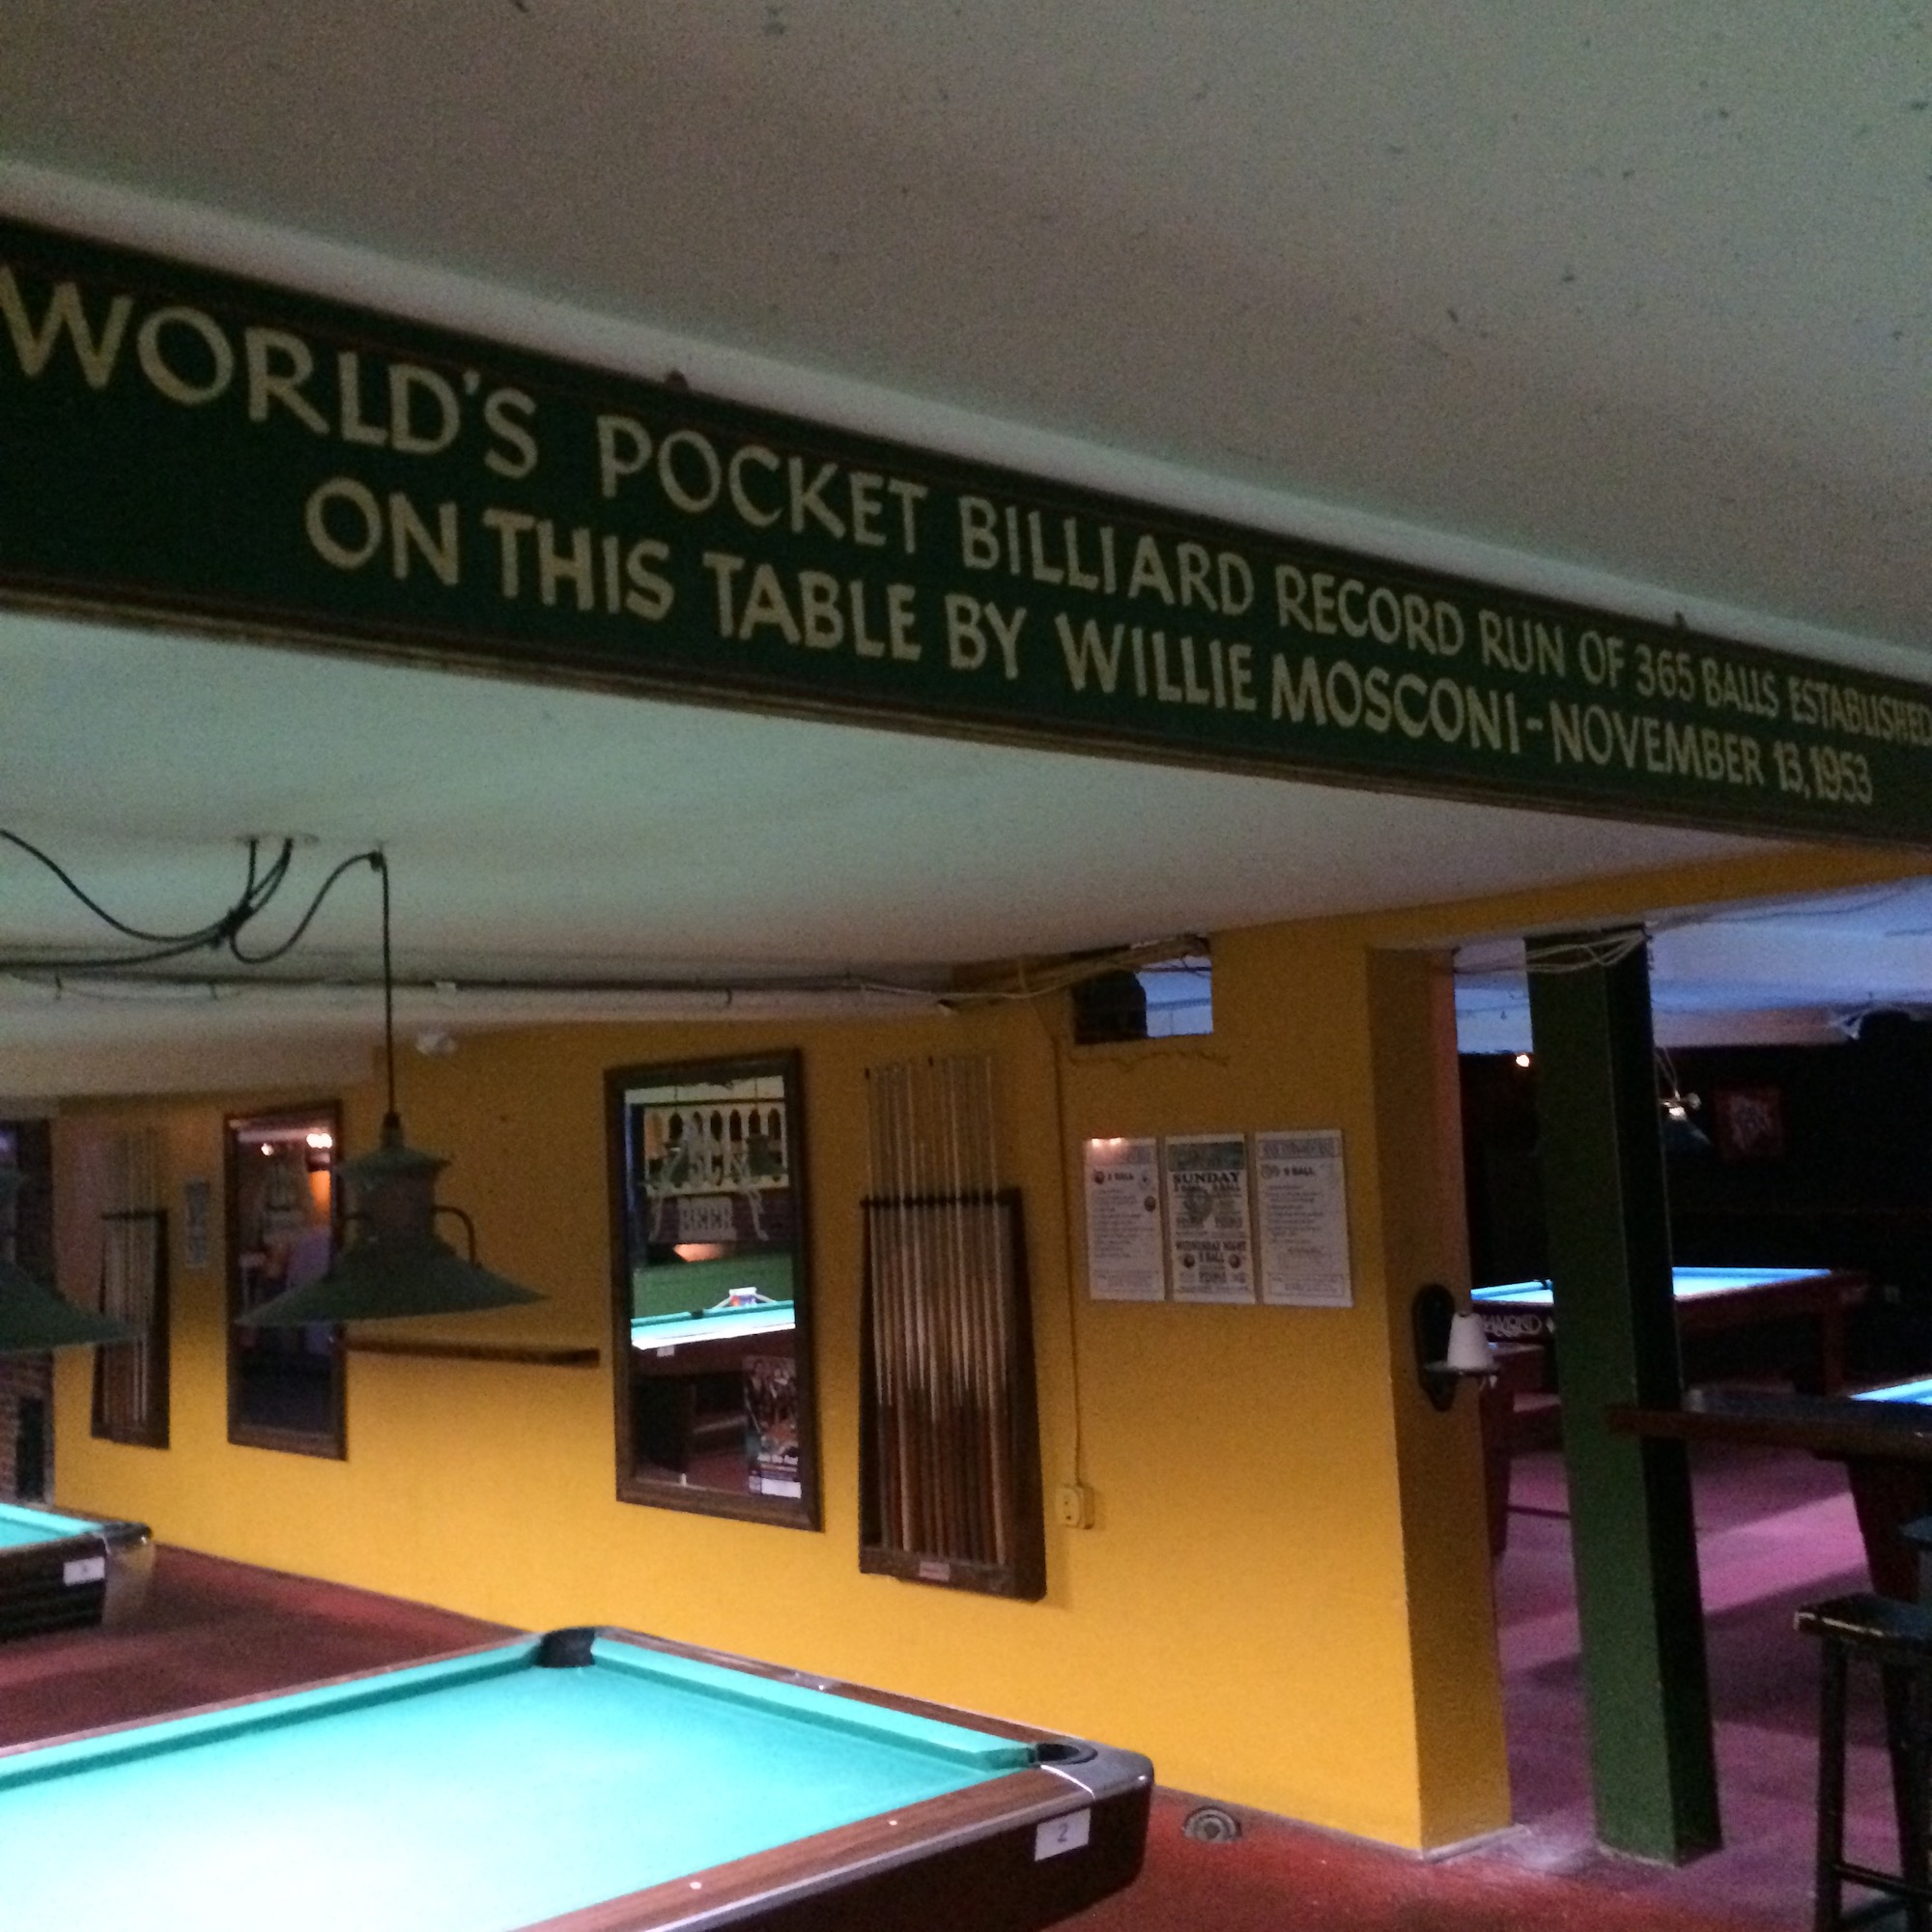 Moe's Pool Hall - From $11.50 - Middletown, OH